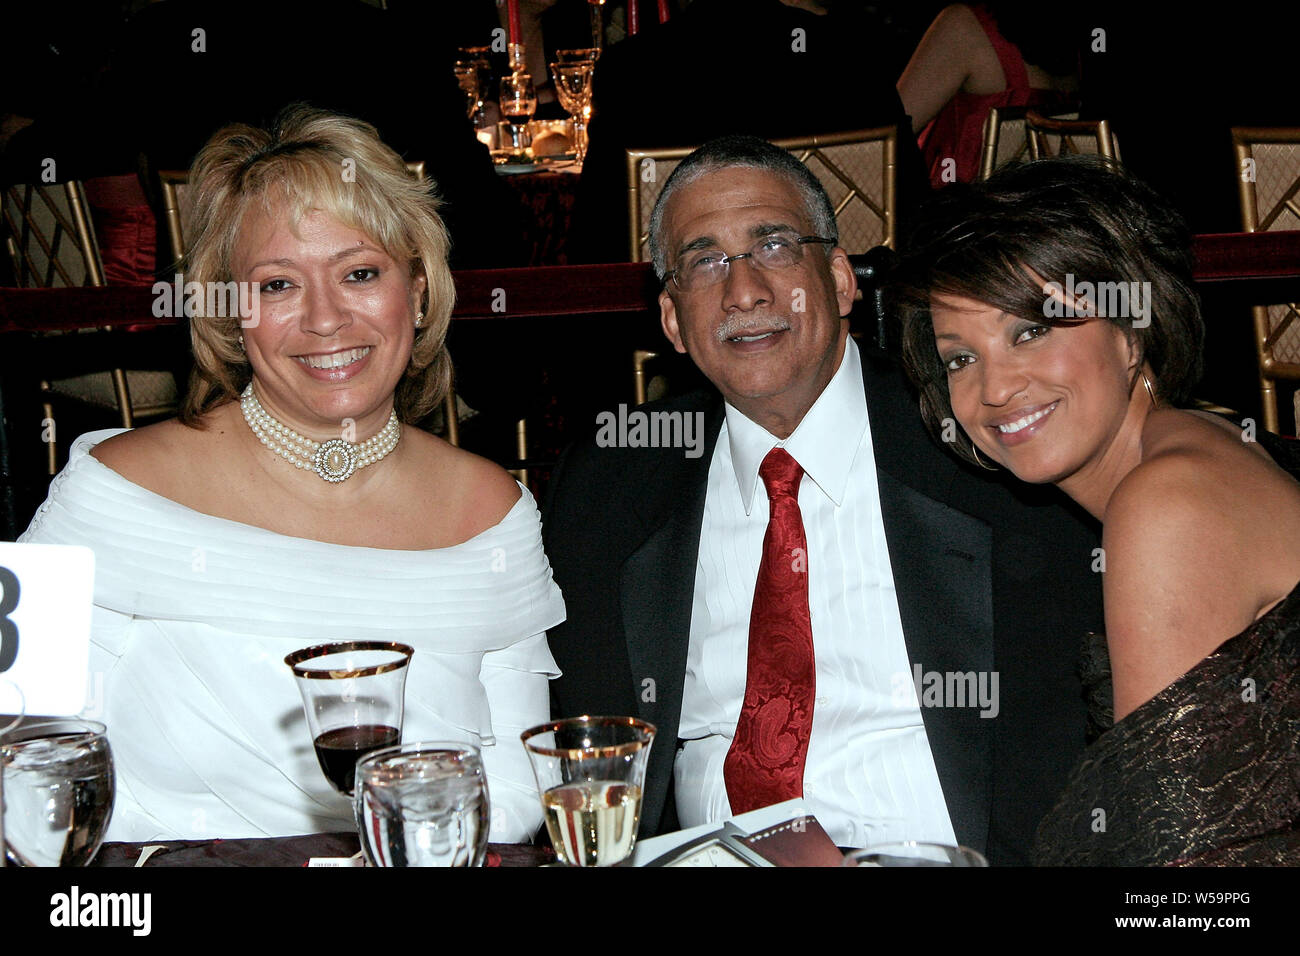 New York, USA. 11 February, 2008. Nancy Armand-Phipps, James A. 'Buff' Parham, Rene Syler at the Red Ball: Evidence's 'Grace in Winter' gala at The Hudson Theater, Millennium Broadway Hotel. Credit: Steve Mack/Alamy Stock Photo